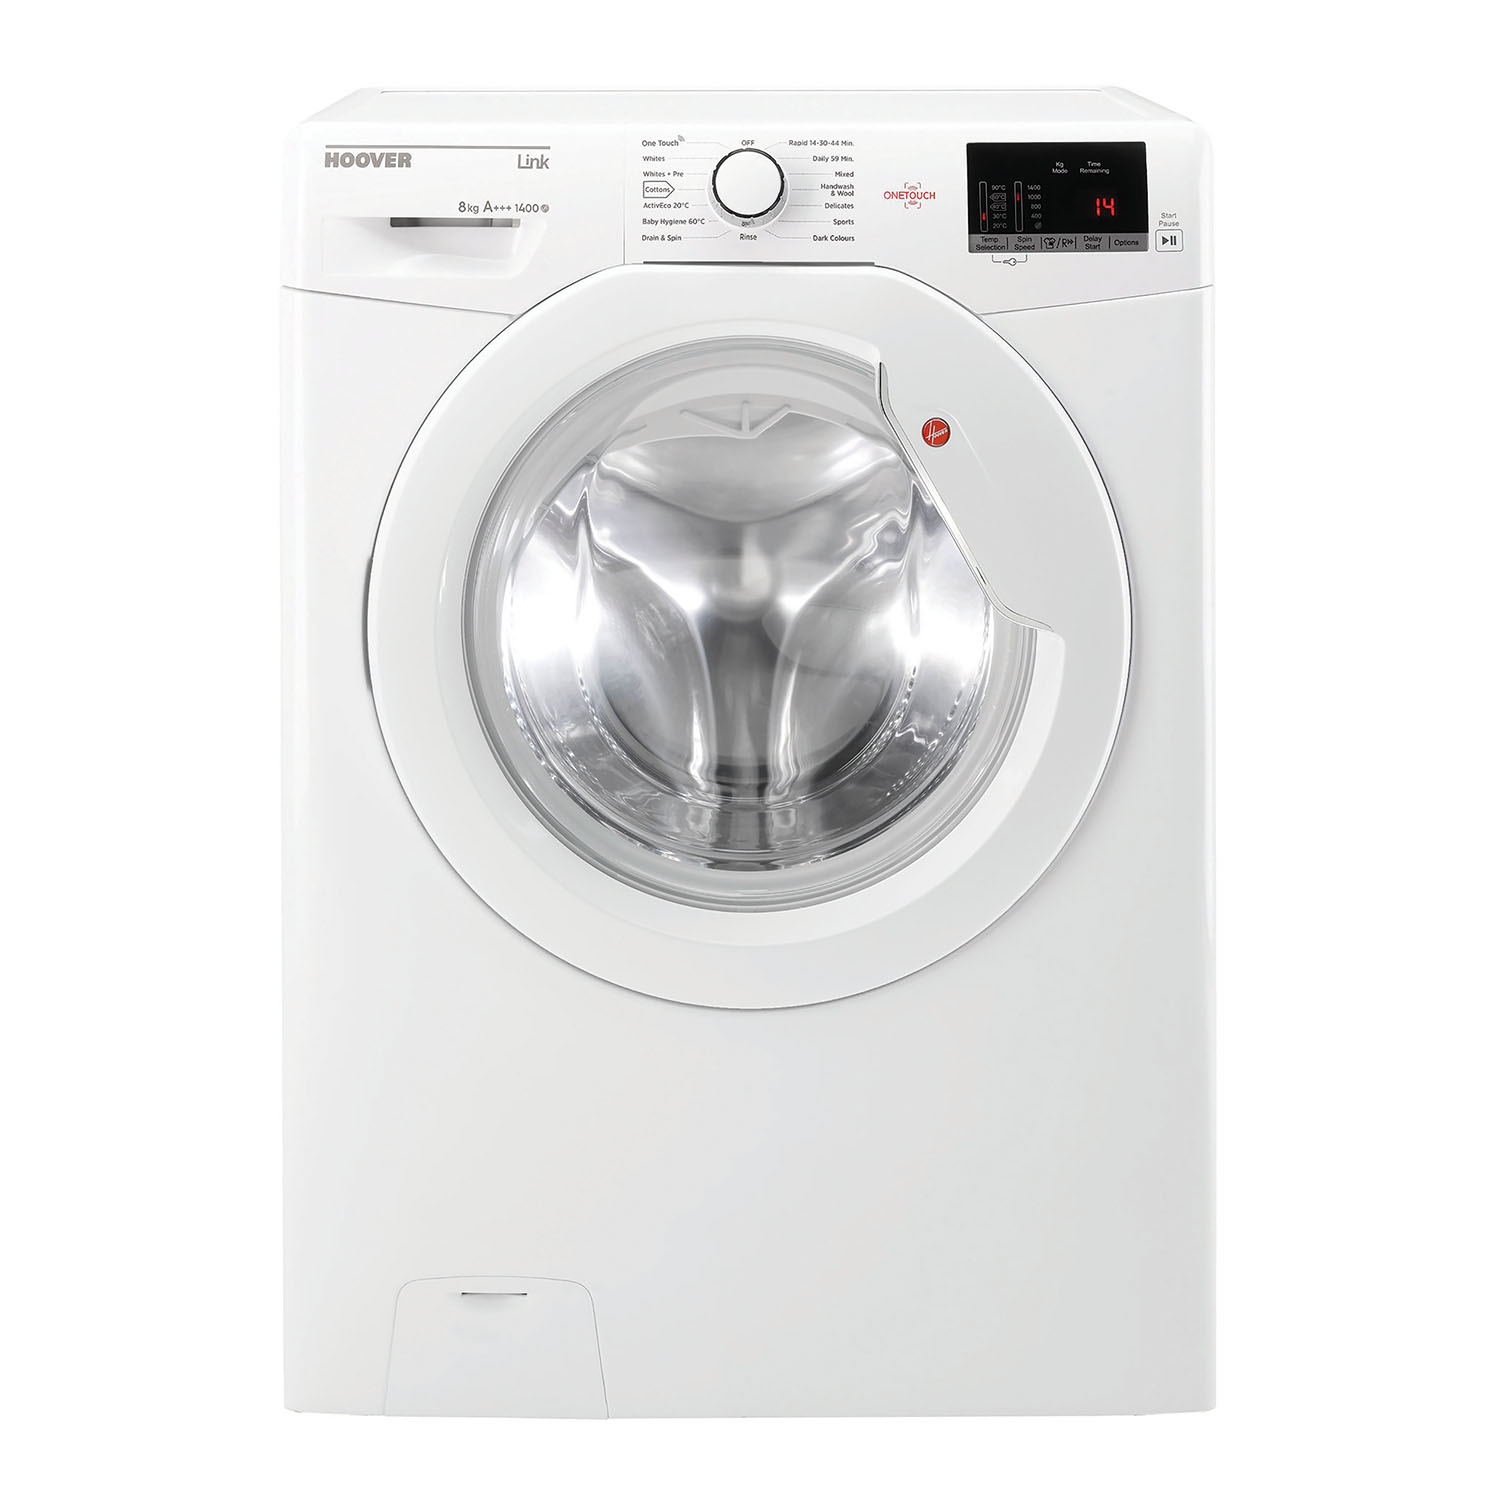 Hoover 8kg 1400 Spin Washing Machine - White - A+++ Energy Rated - 0